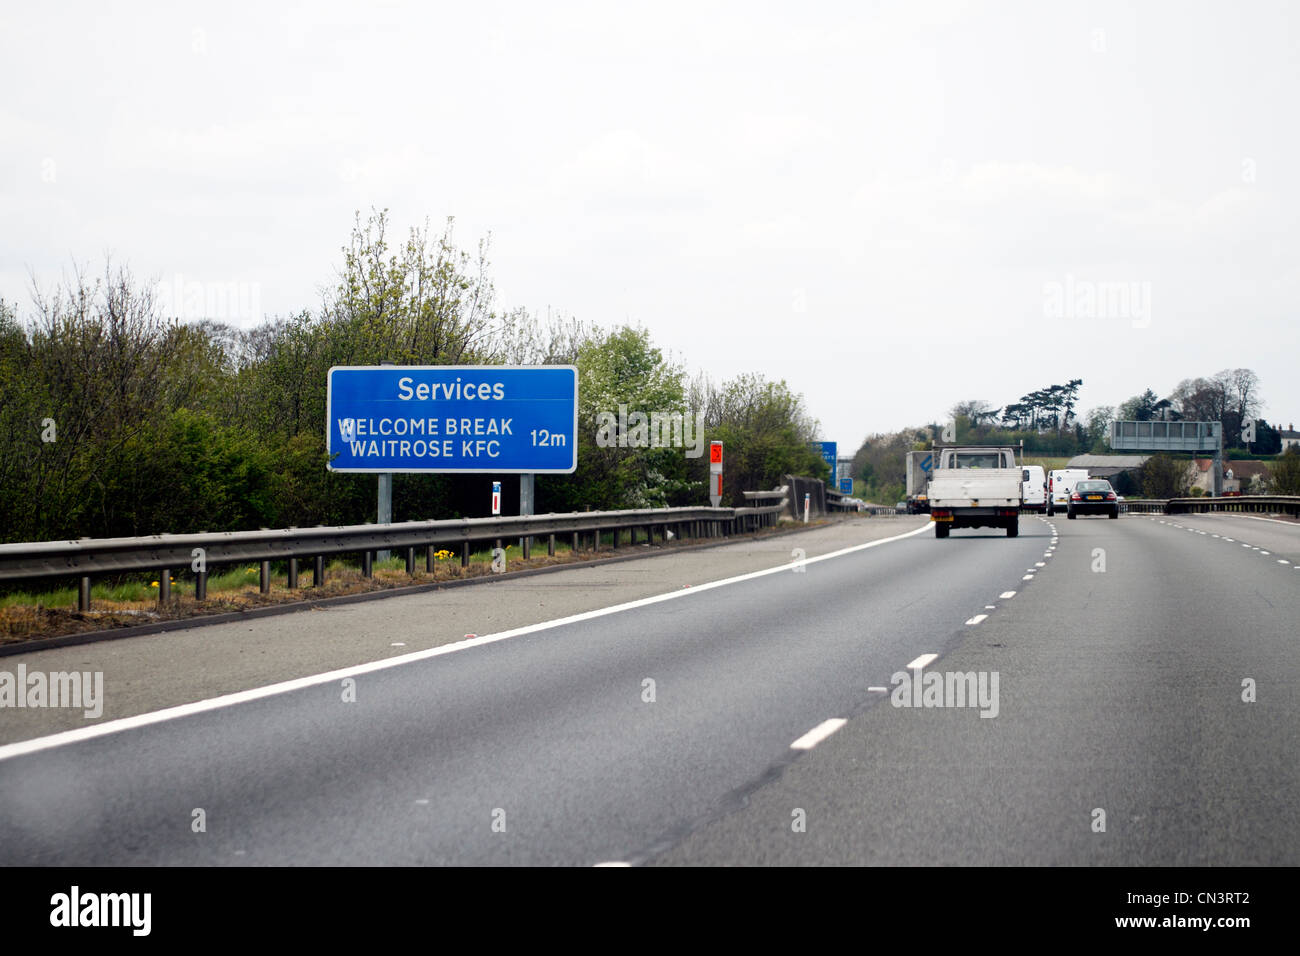 Motorway sign on the M40 for Warwick services - KFC and Waitrose Stock Photo